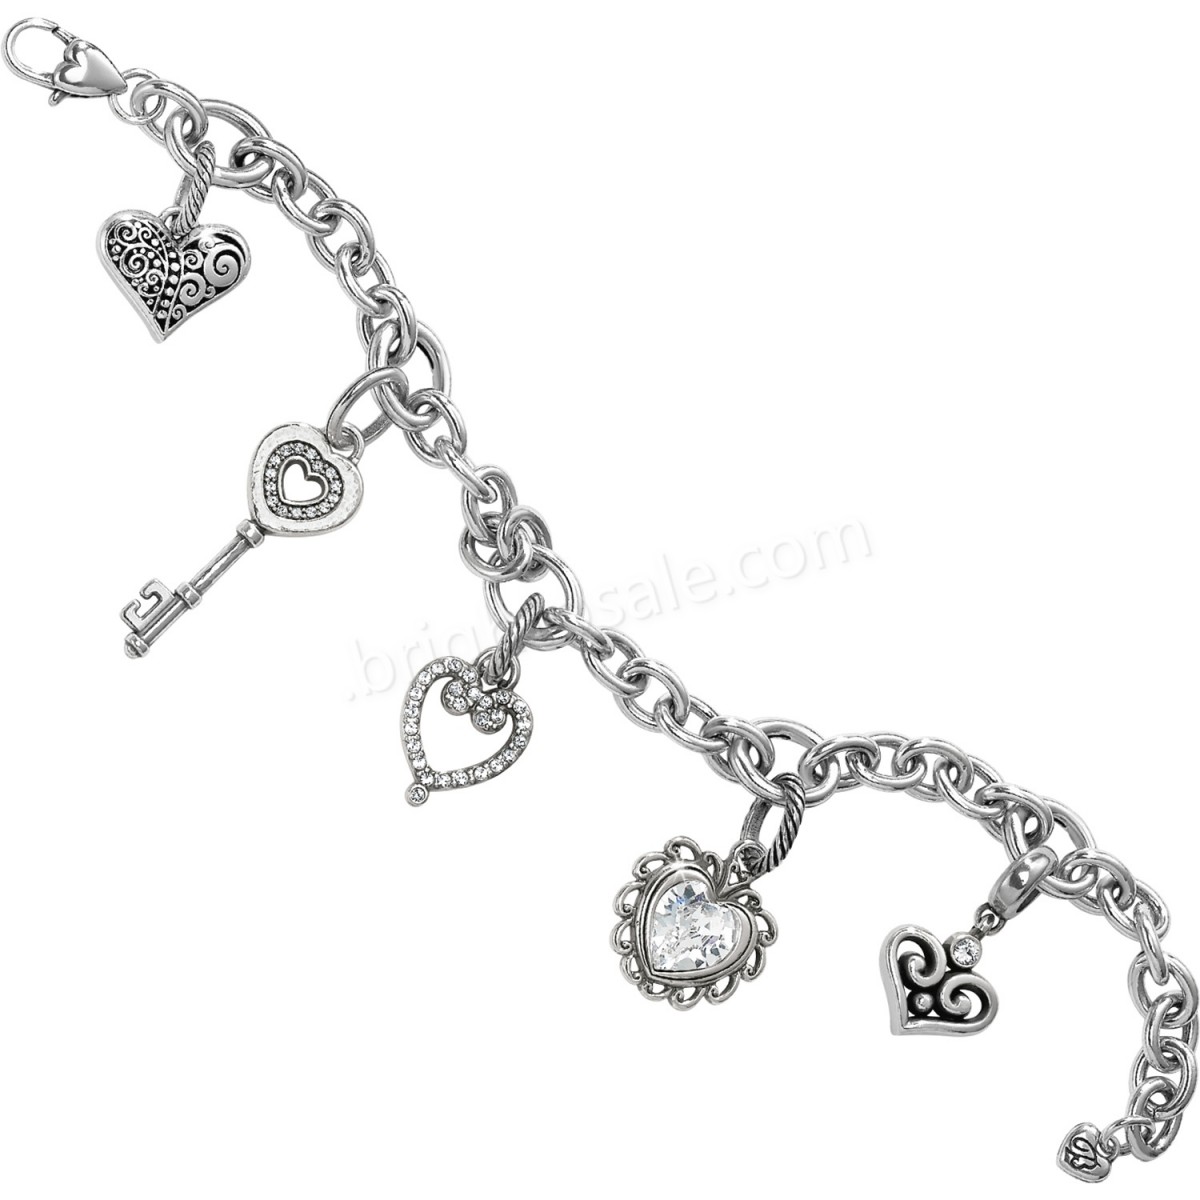 Brighton Collectibles & Online Discount Starry Night Cross Charm Bracelet - -0